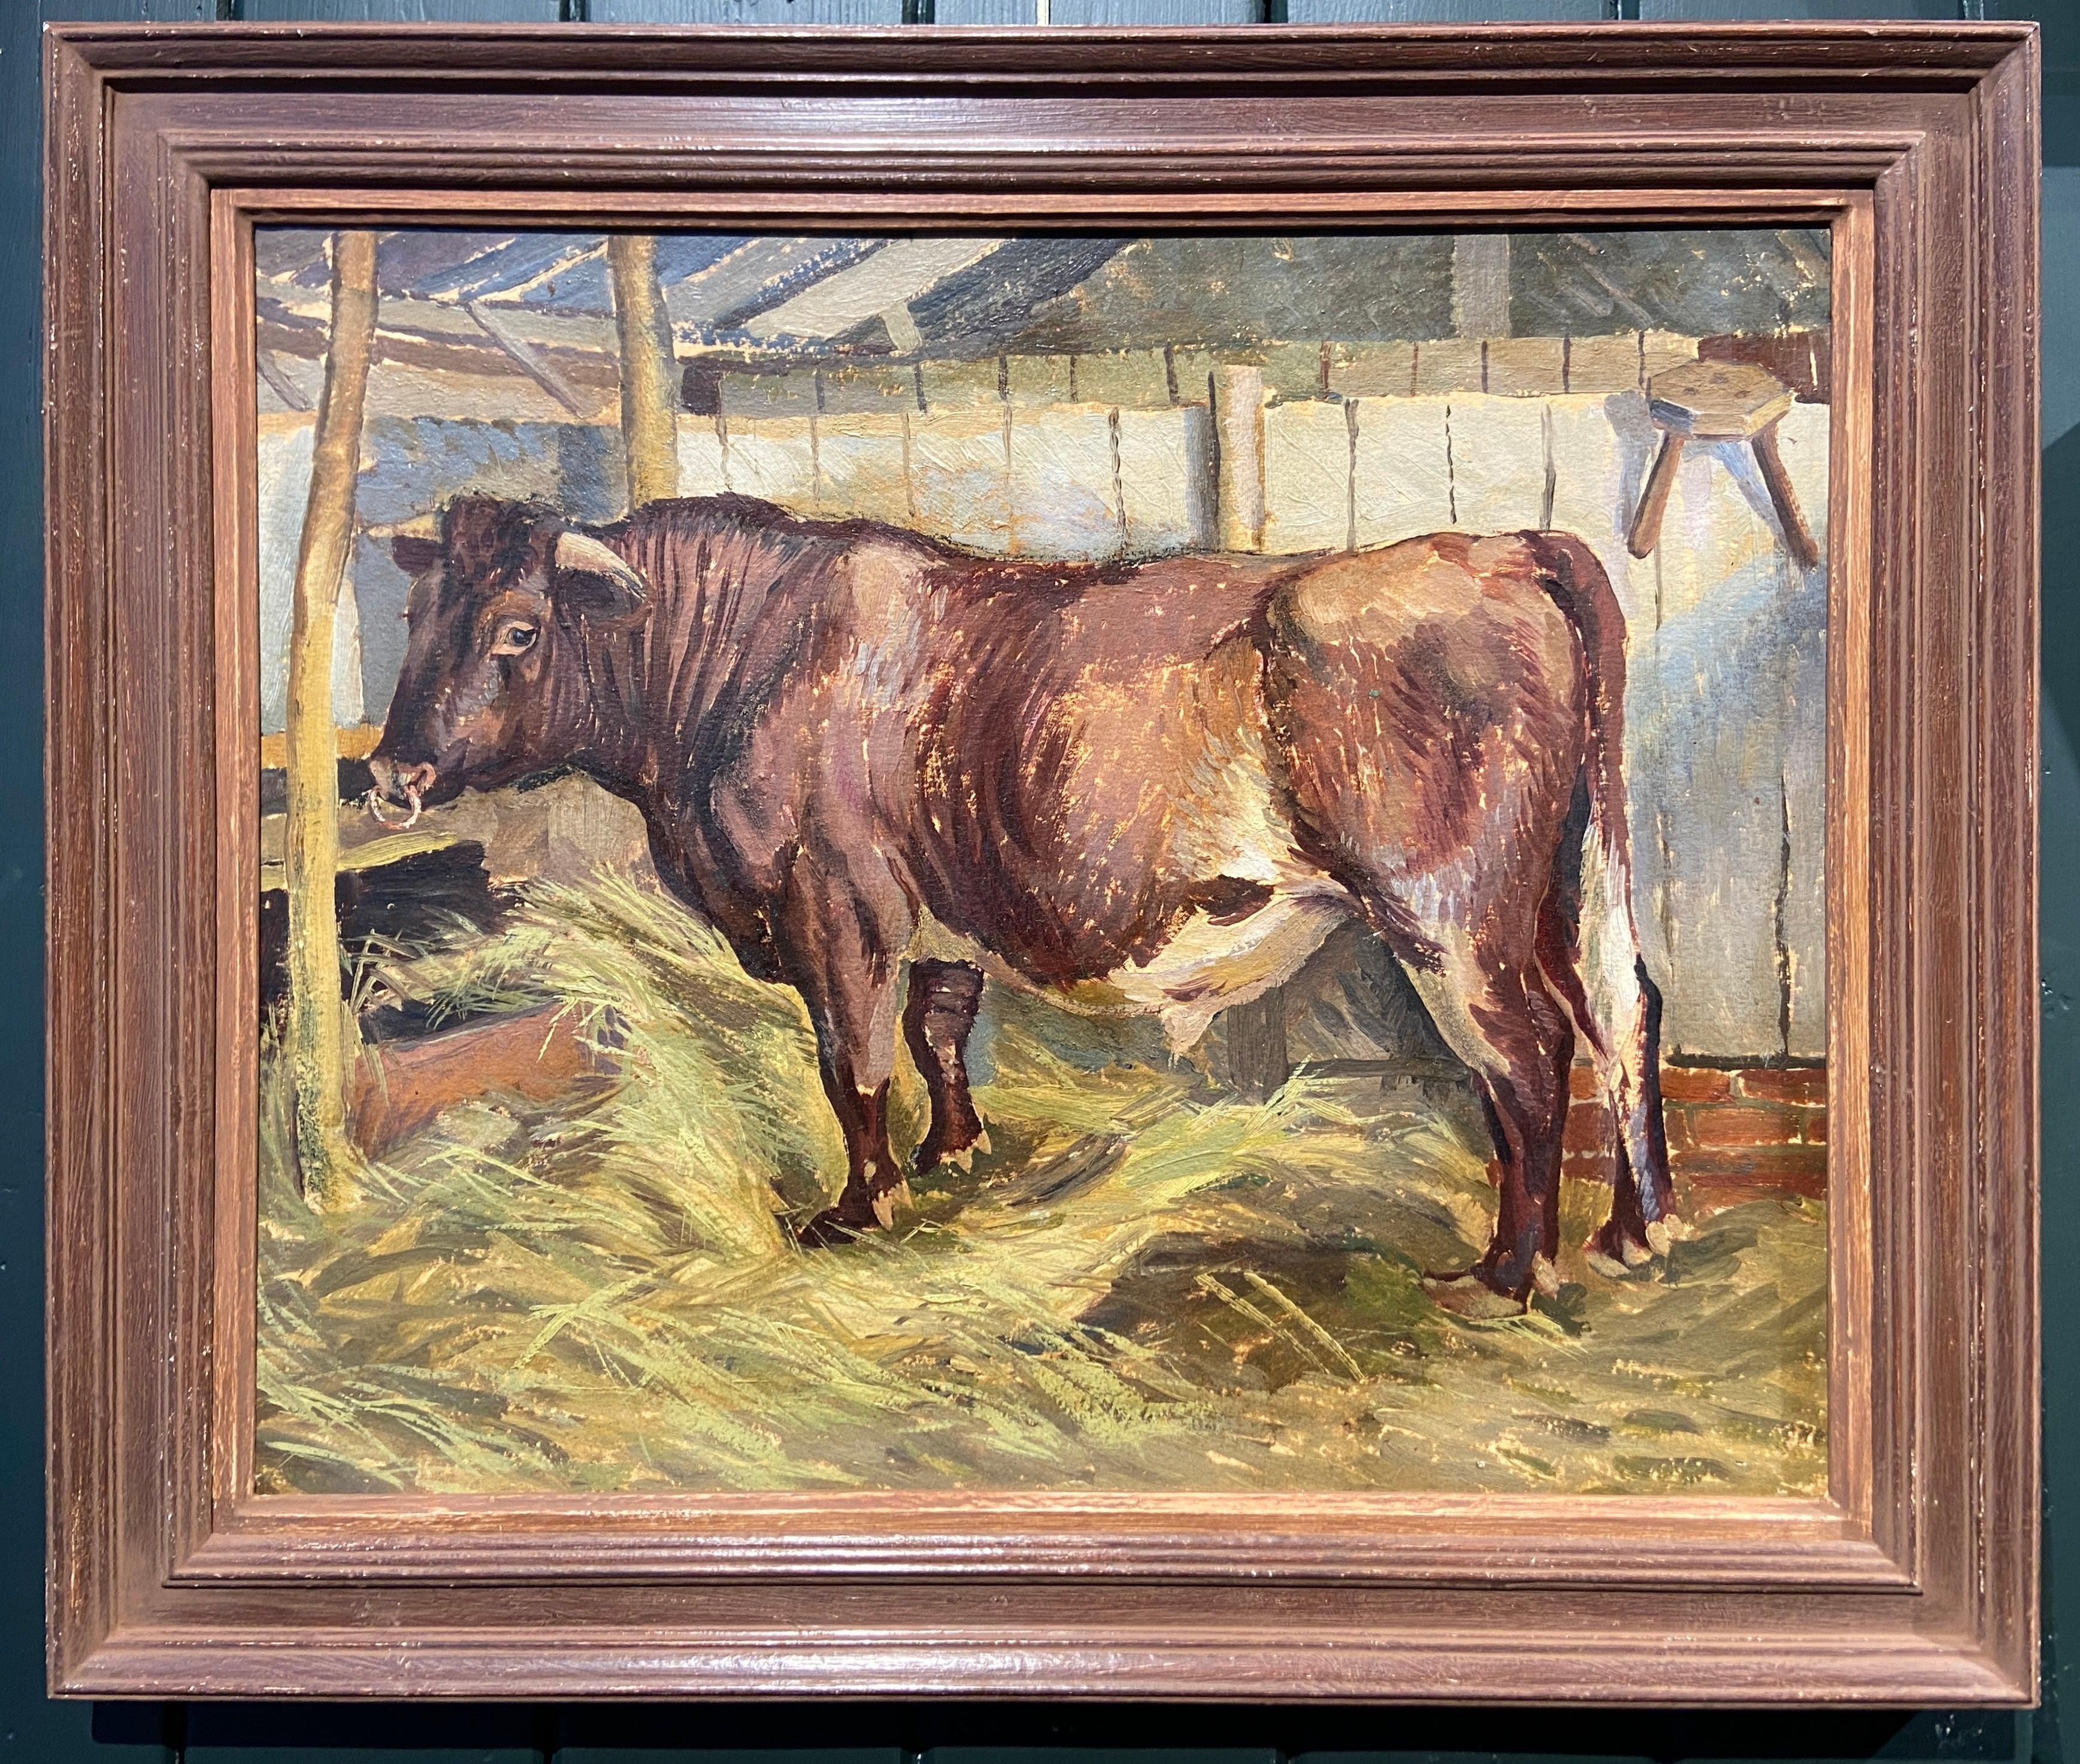 Oil on board, signed and inscribed on reverse
Image size: 16 x 19 1/2 inches (40.5 x 49.5 cm)

A charming painting of a Bull in a farmyard. The intense realism of the work elevates the beast: the distinctive markings and the coarse fur that covers